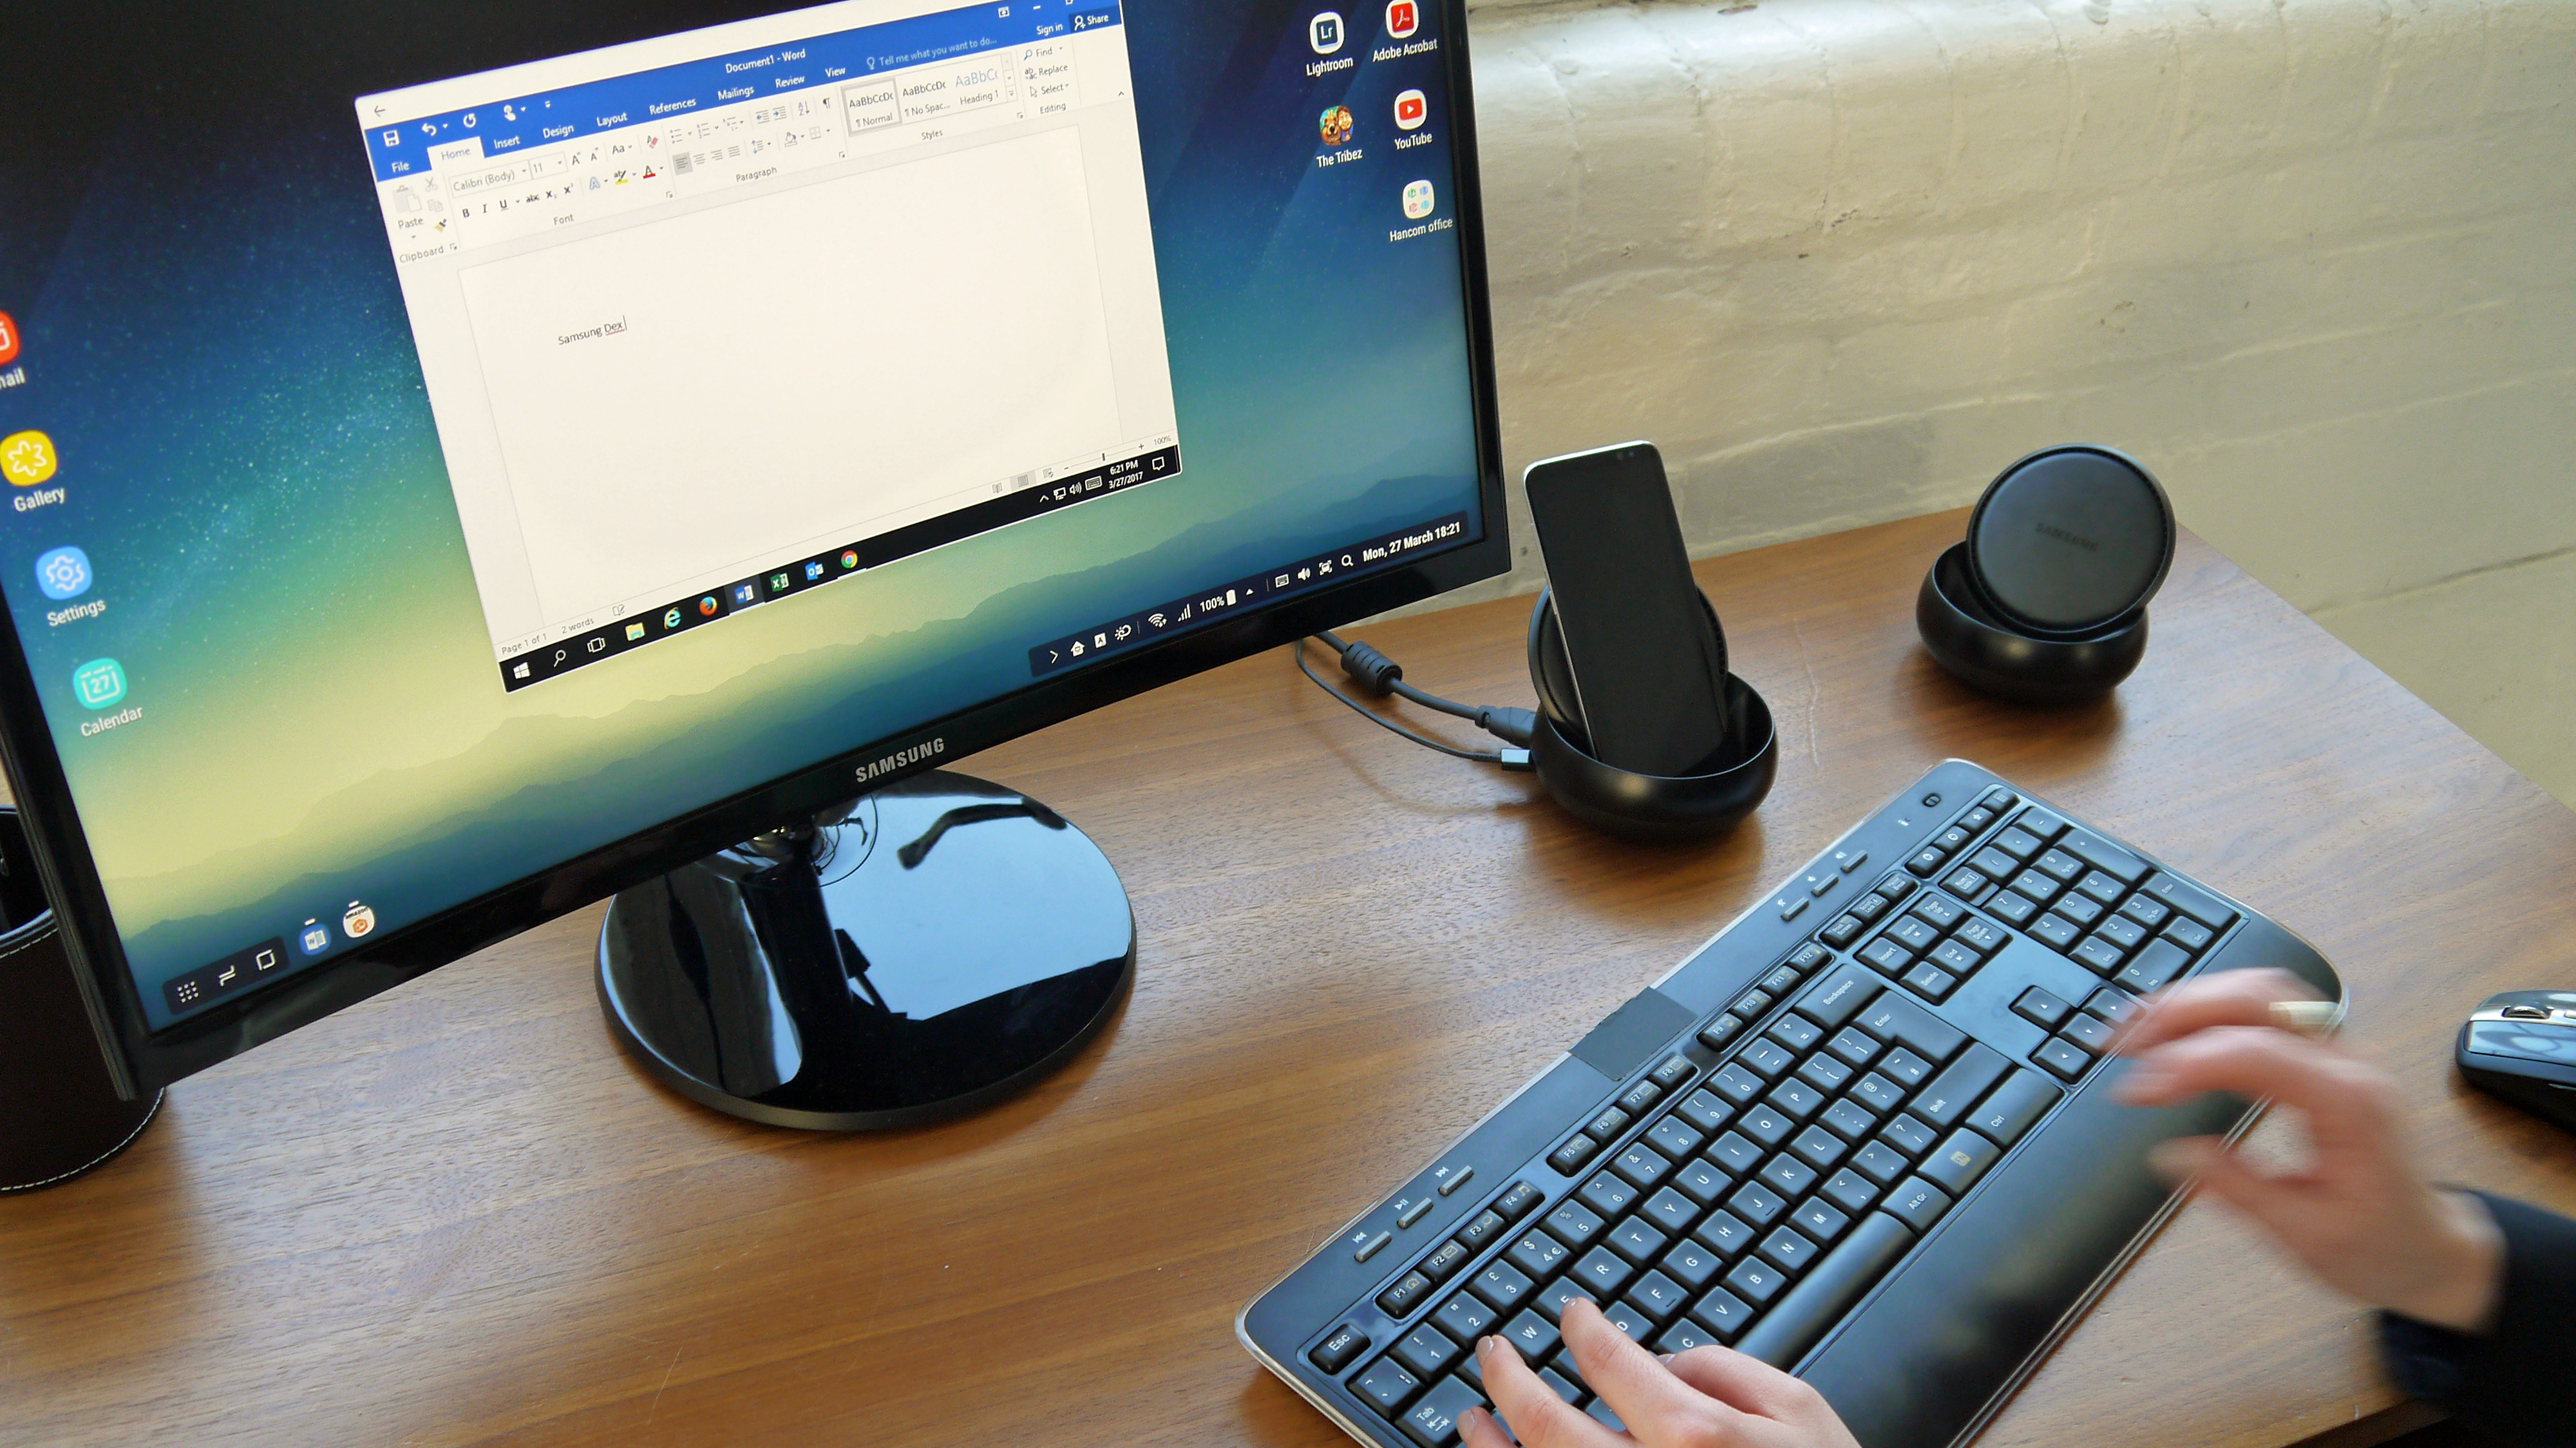 Hands on: Samsung Dex review